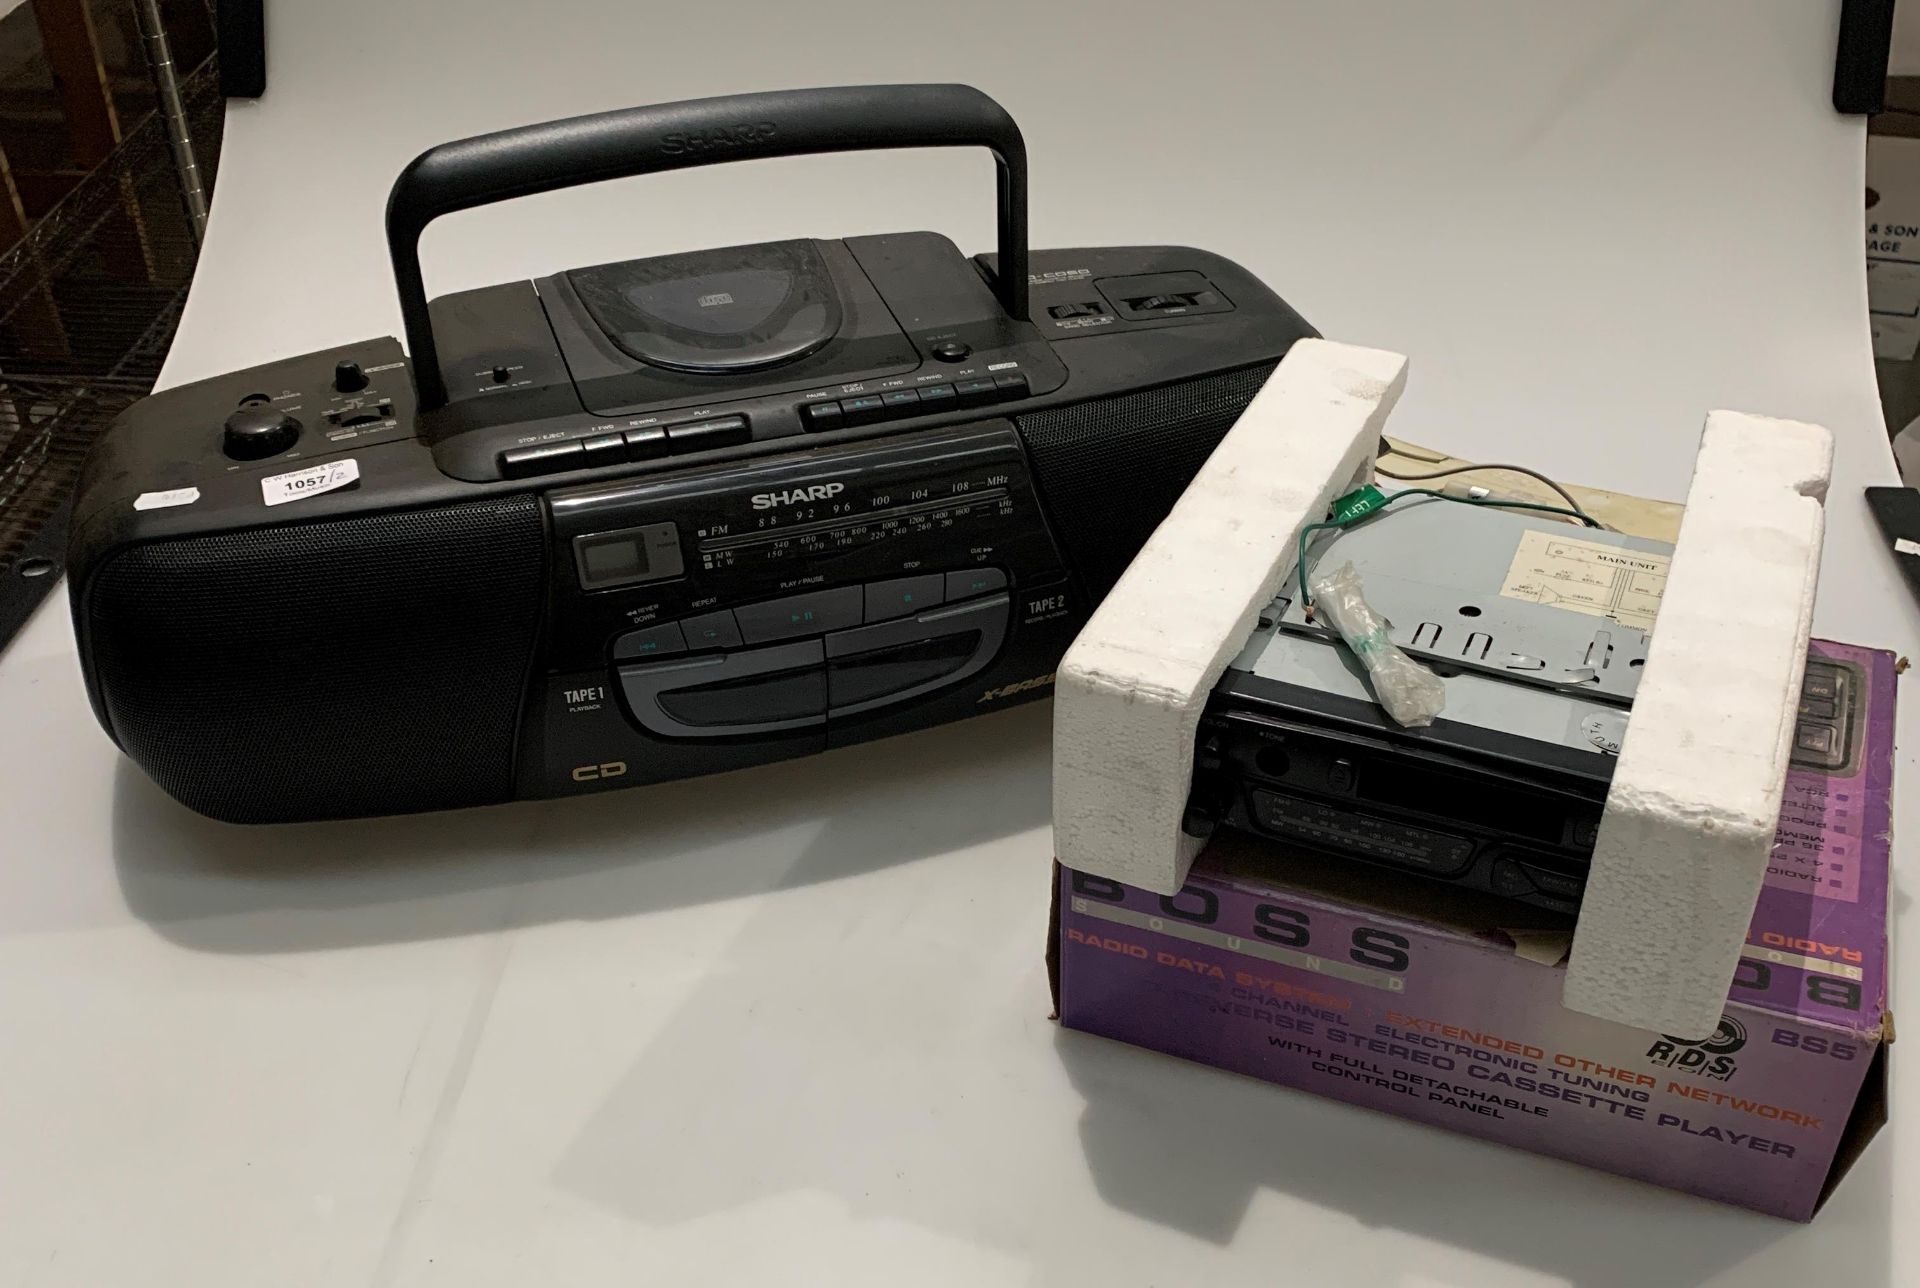 A Harvard car radio/cassette player in non matching Boss box and a Sharp WQ-C060 portable stereo